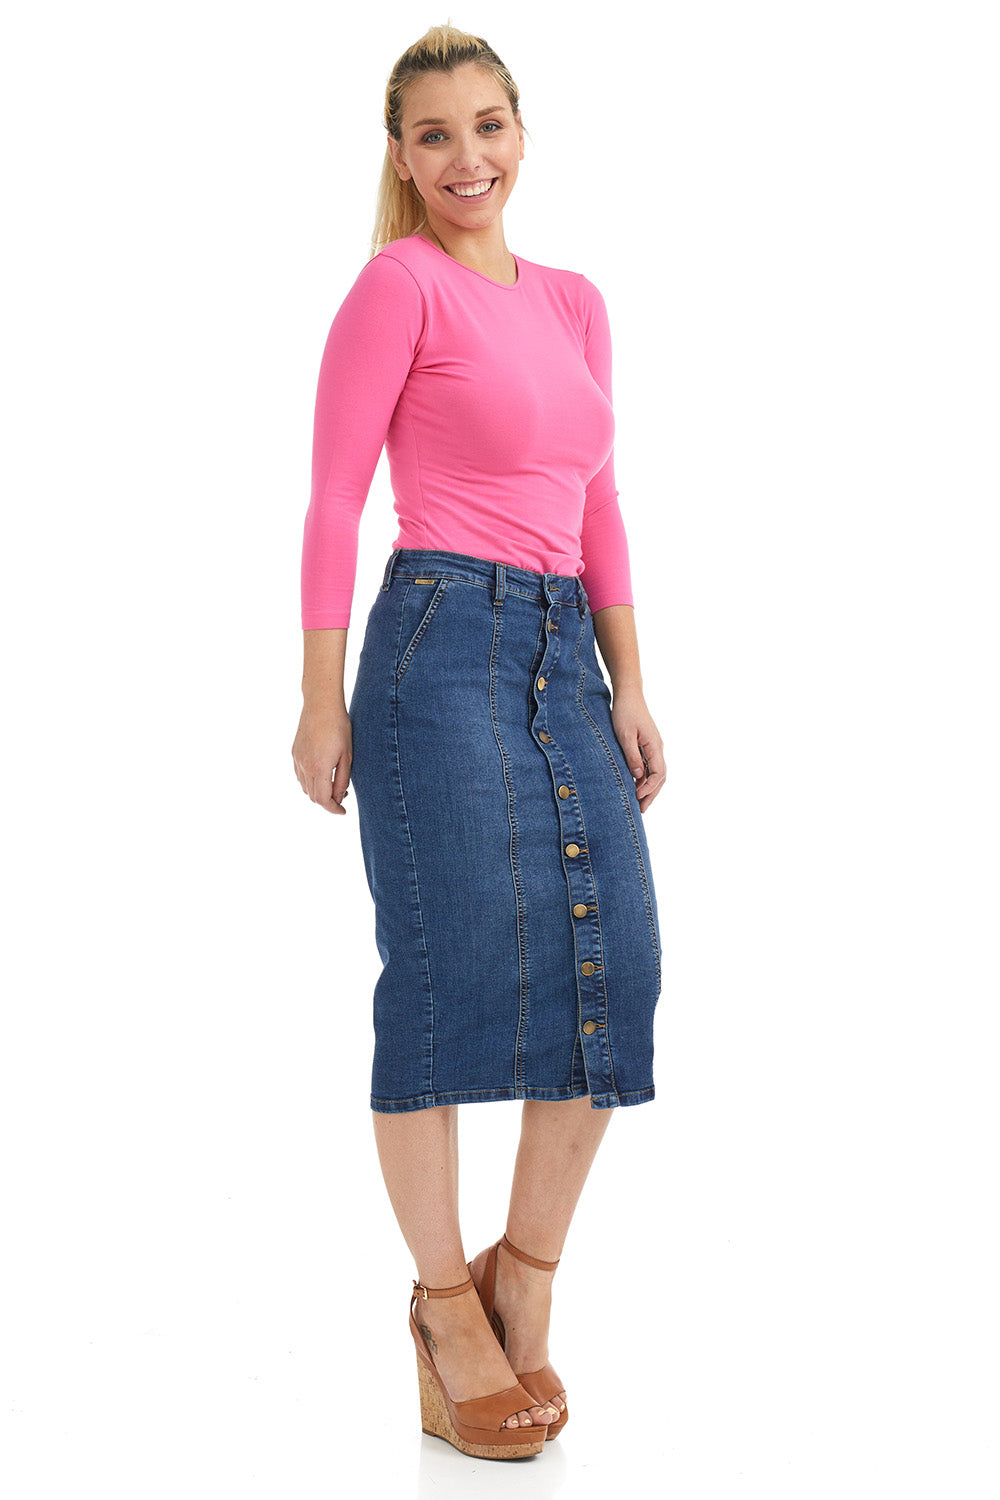 Buy Women Maxi Pencil Jean Skirt- High Waisted A-Line Long Denim Skirts for  Ladies- Blue Jean Skirt,Blue,6 at Amazon.in